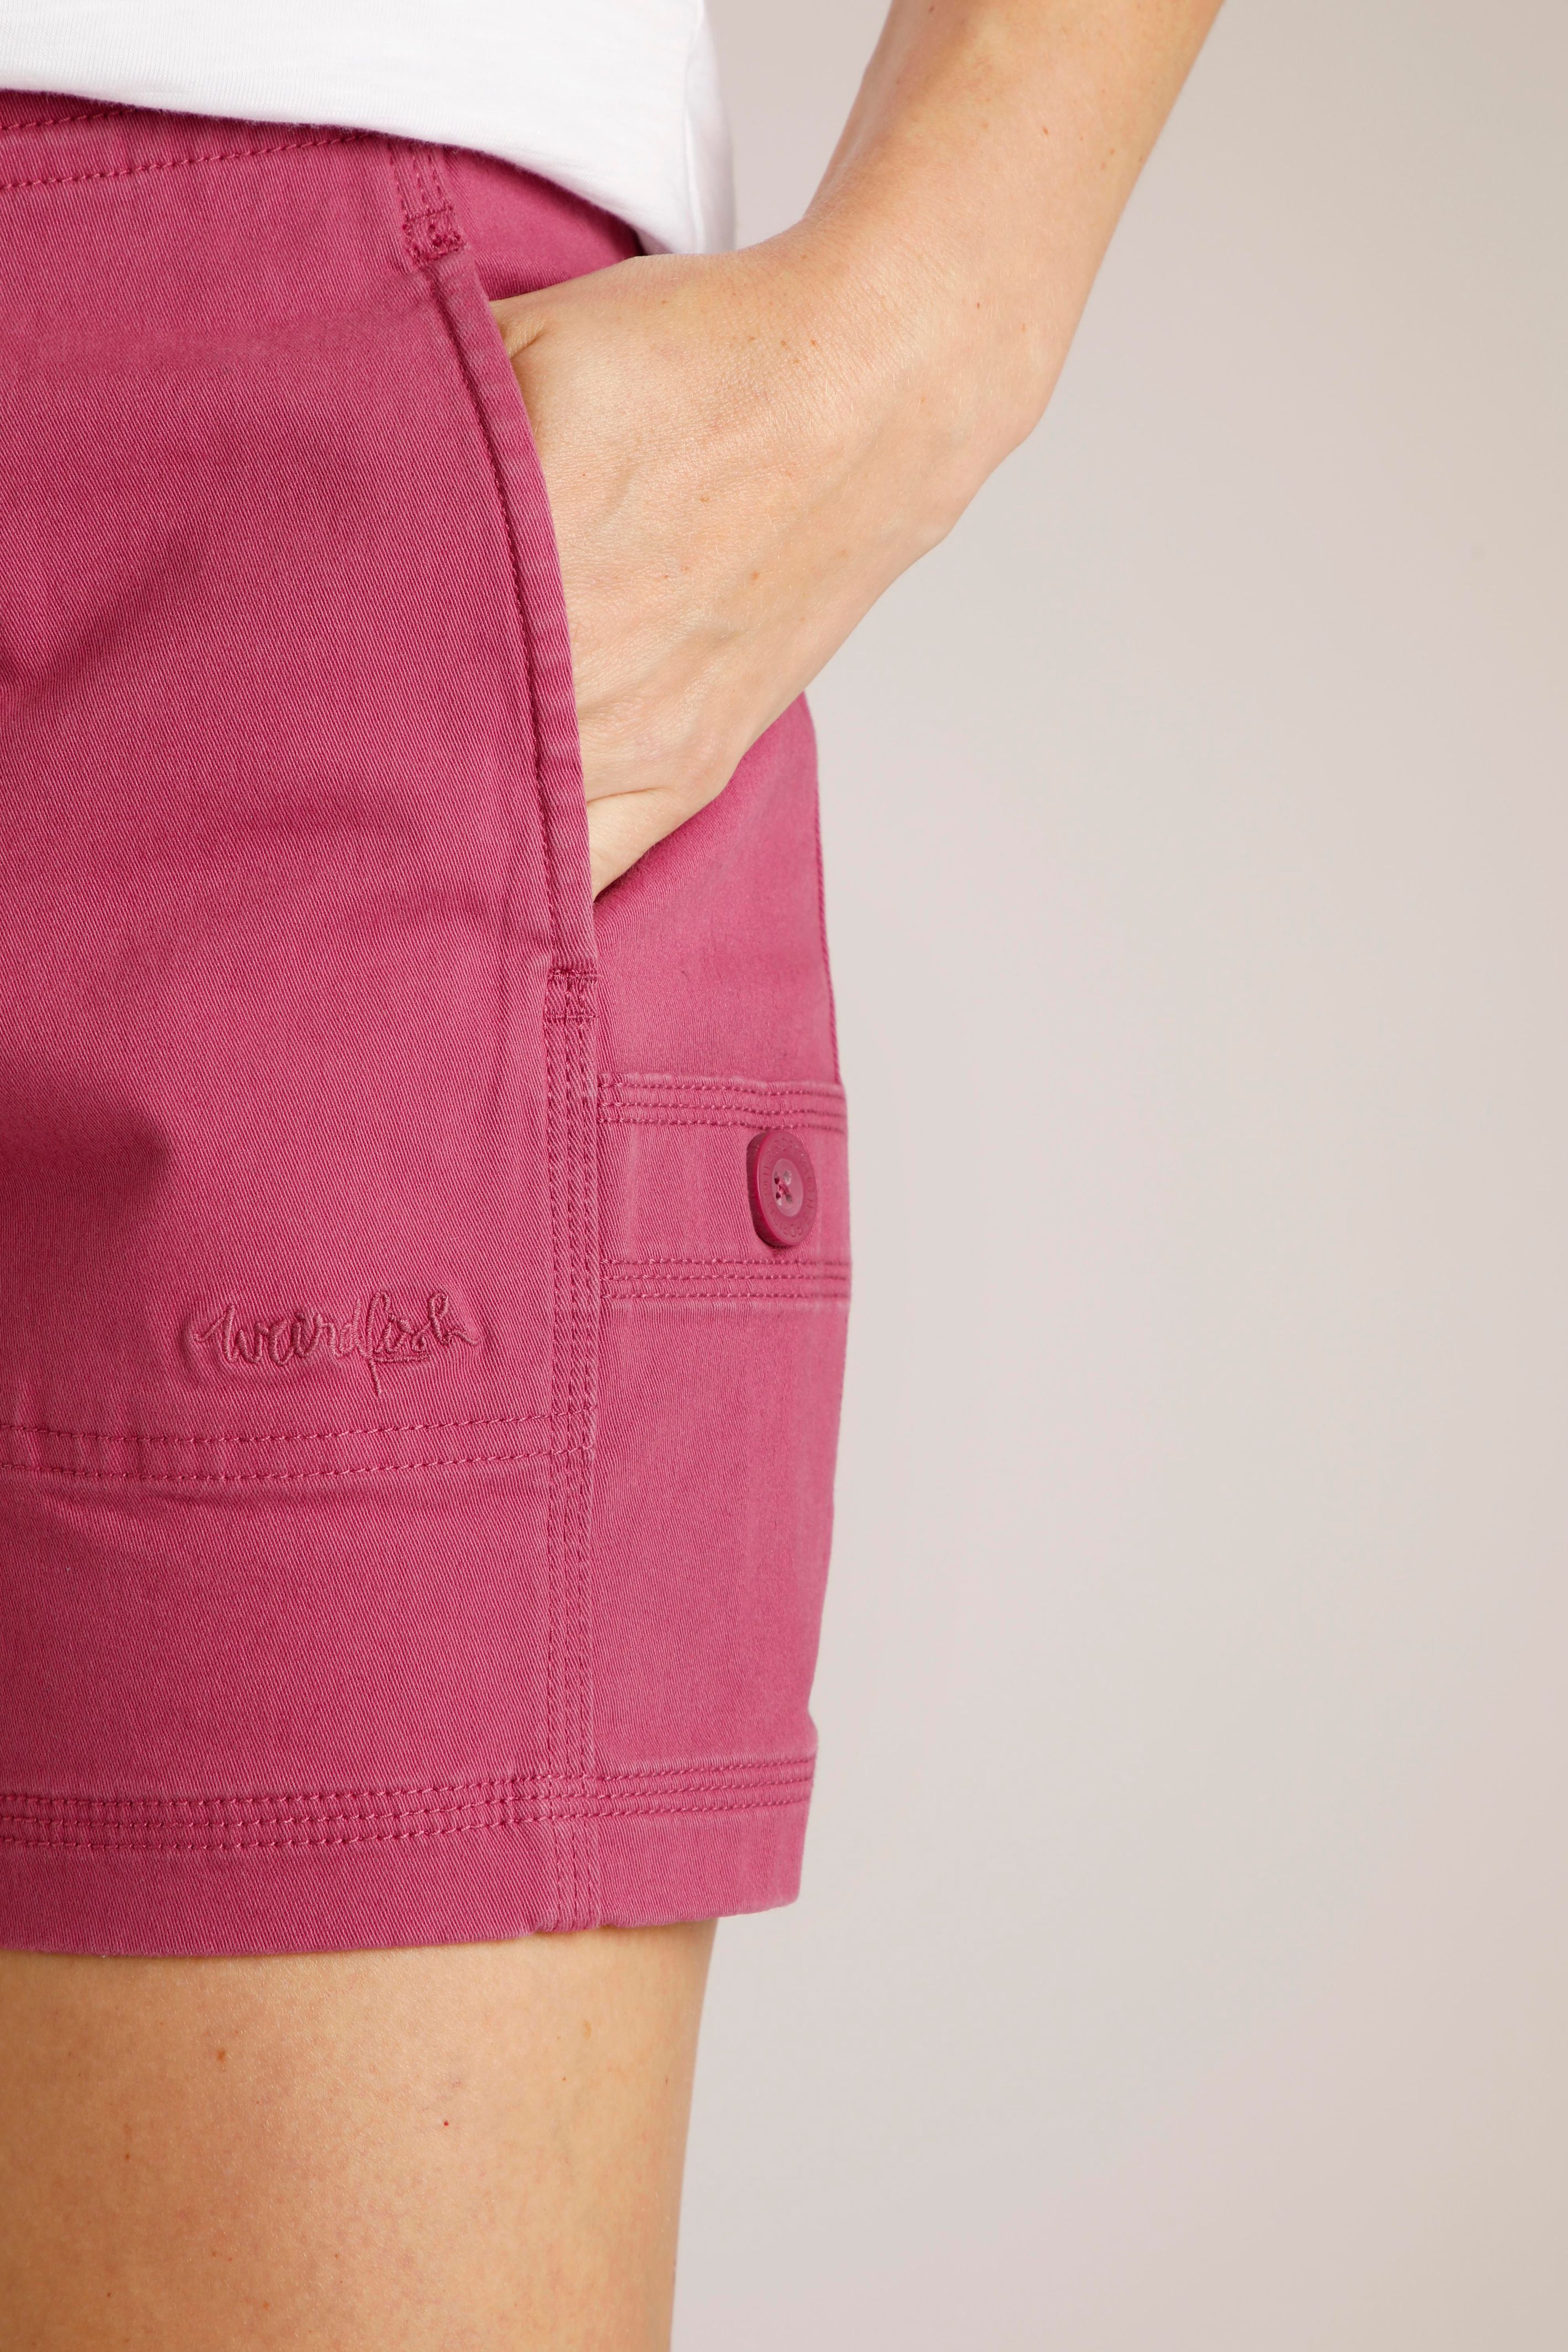 Willoughby Summer Shorts Crushed Berry